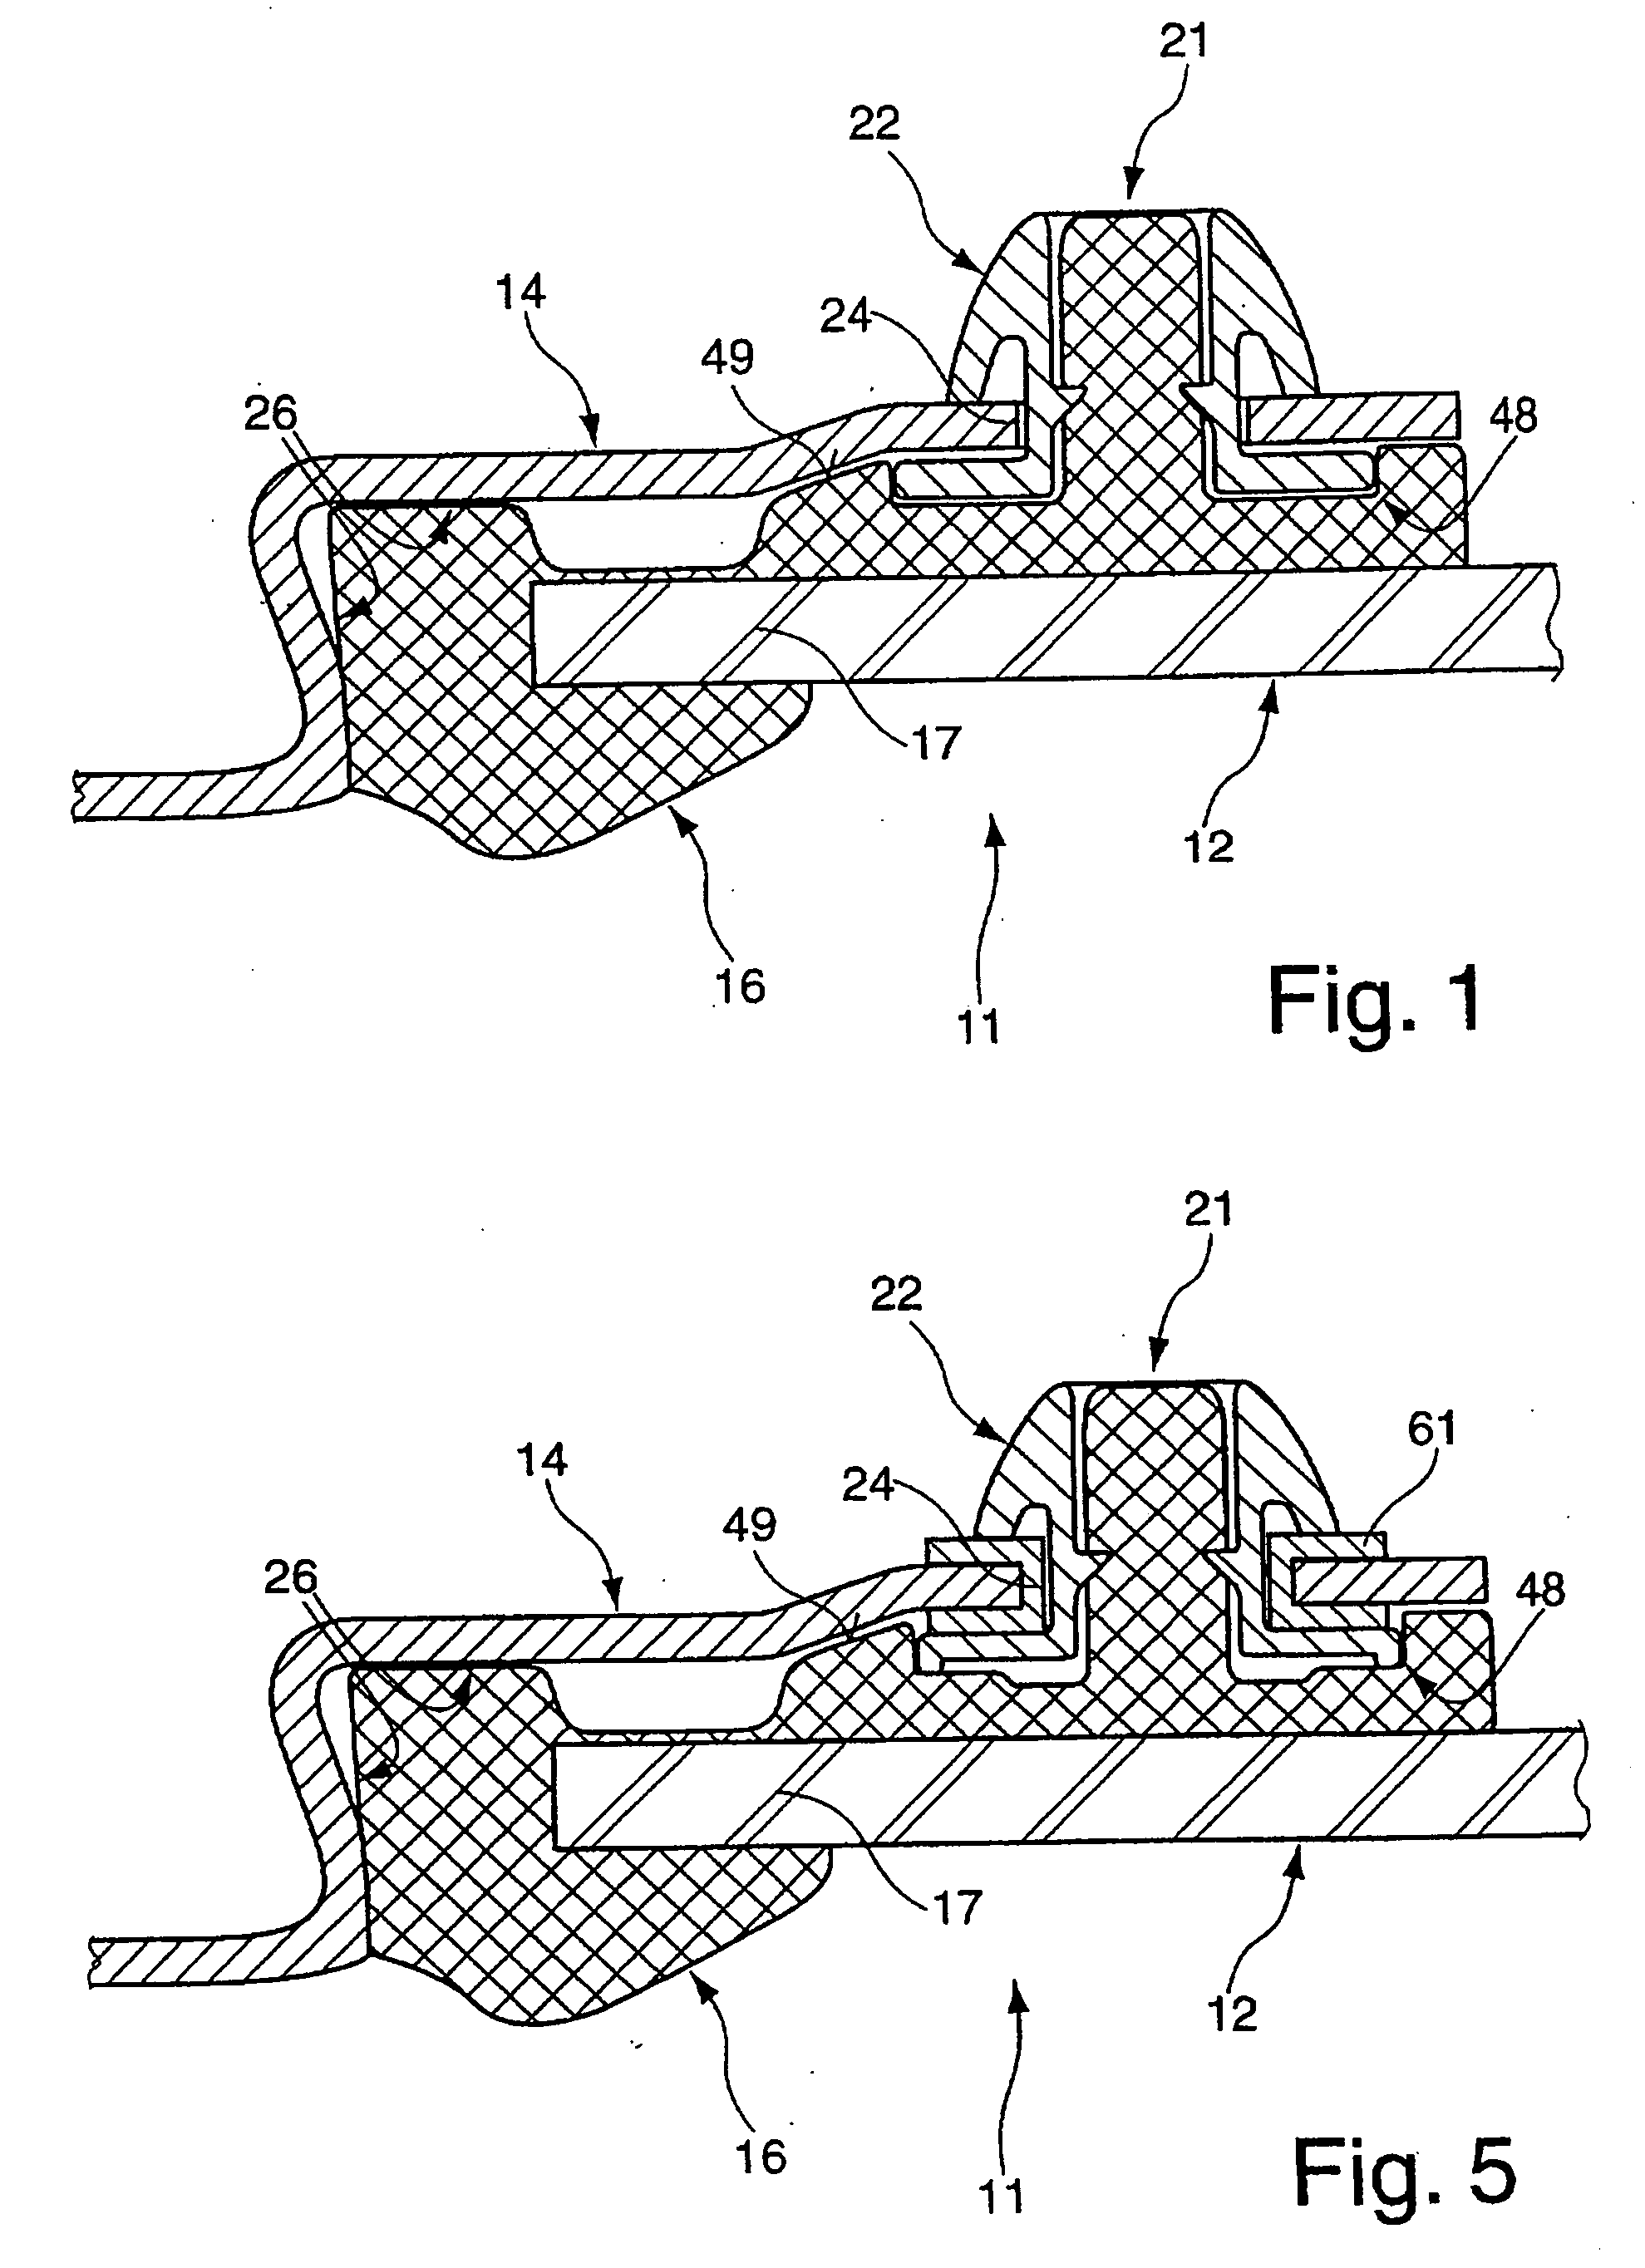 Assembly of a Fixed Pane on a Car Body Flange and Fastening Clip for Mounting of the Fixed Pane